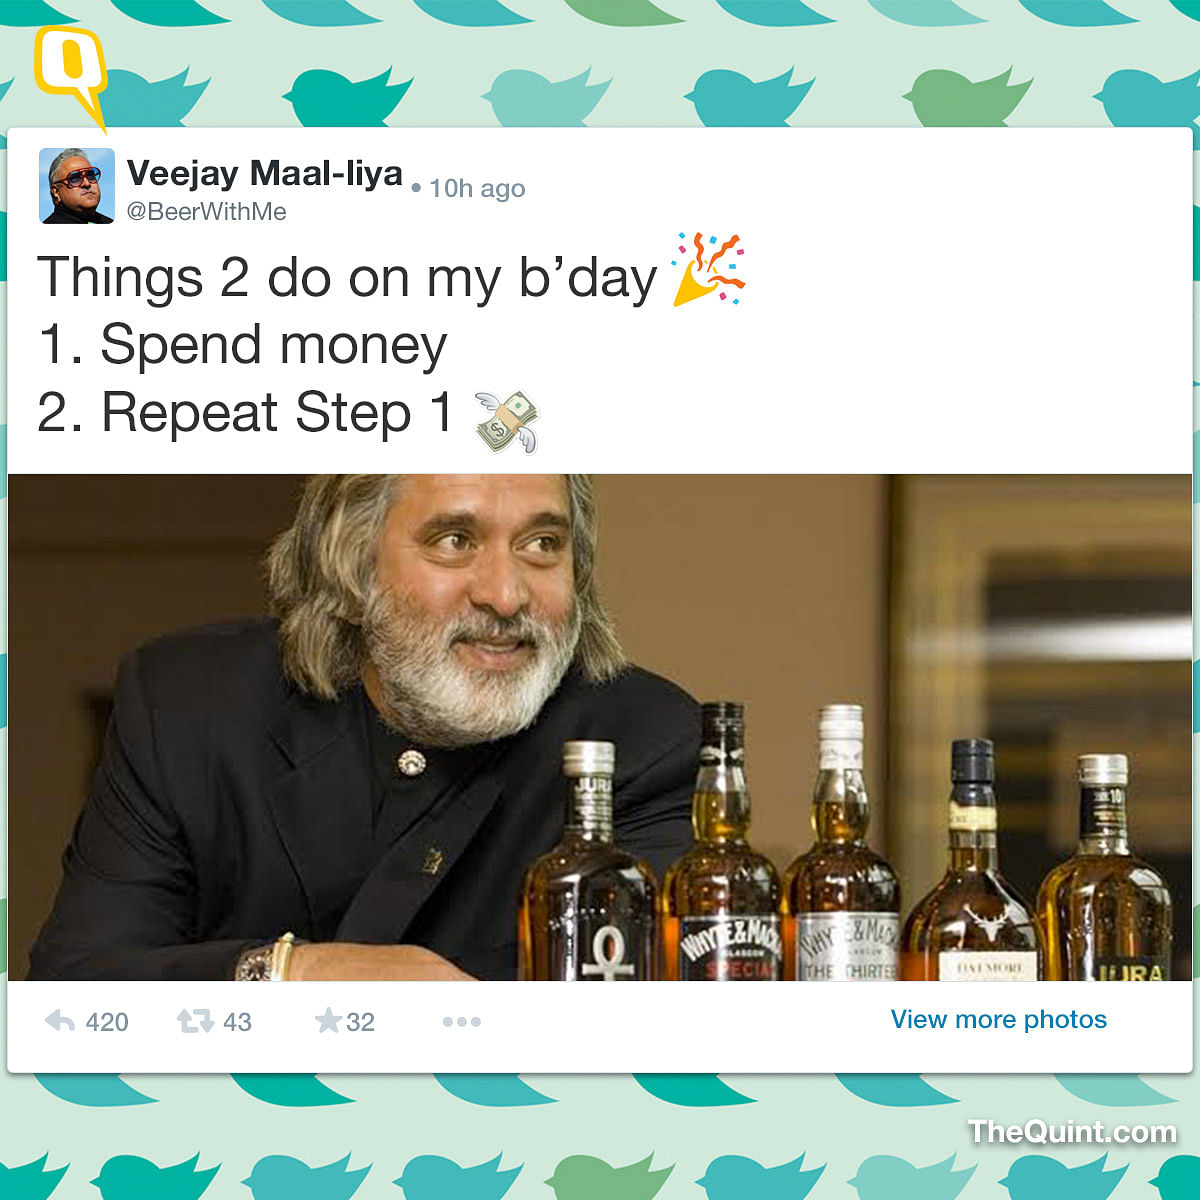 Vijay Mallya’s  Twitter account got hacked, revealing a lot of personal data. Take a secret look at his b’day plans.